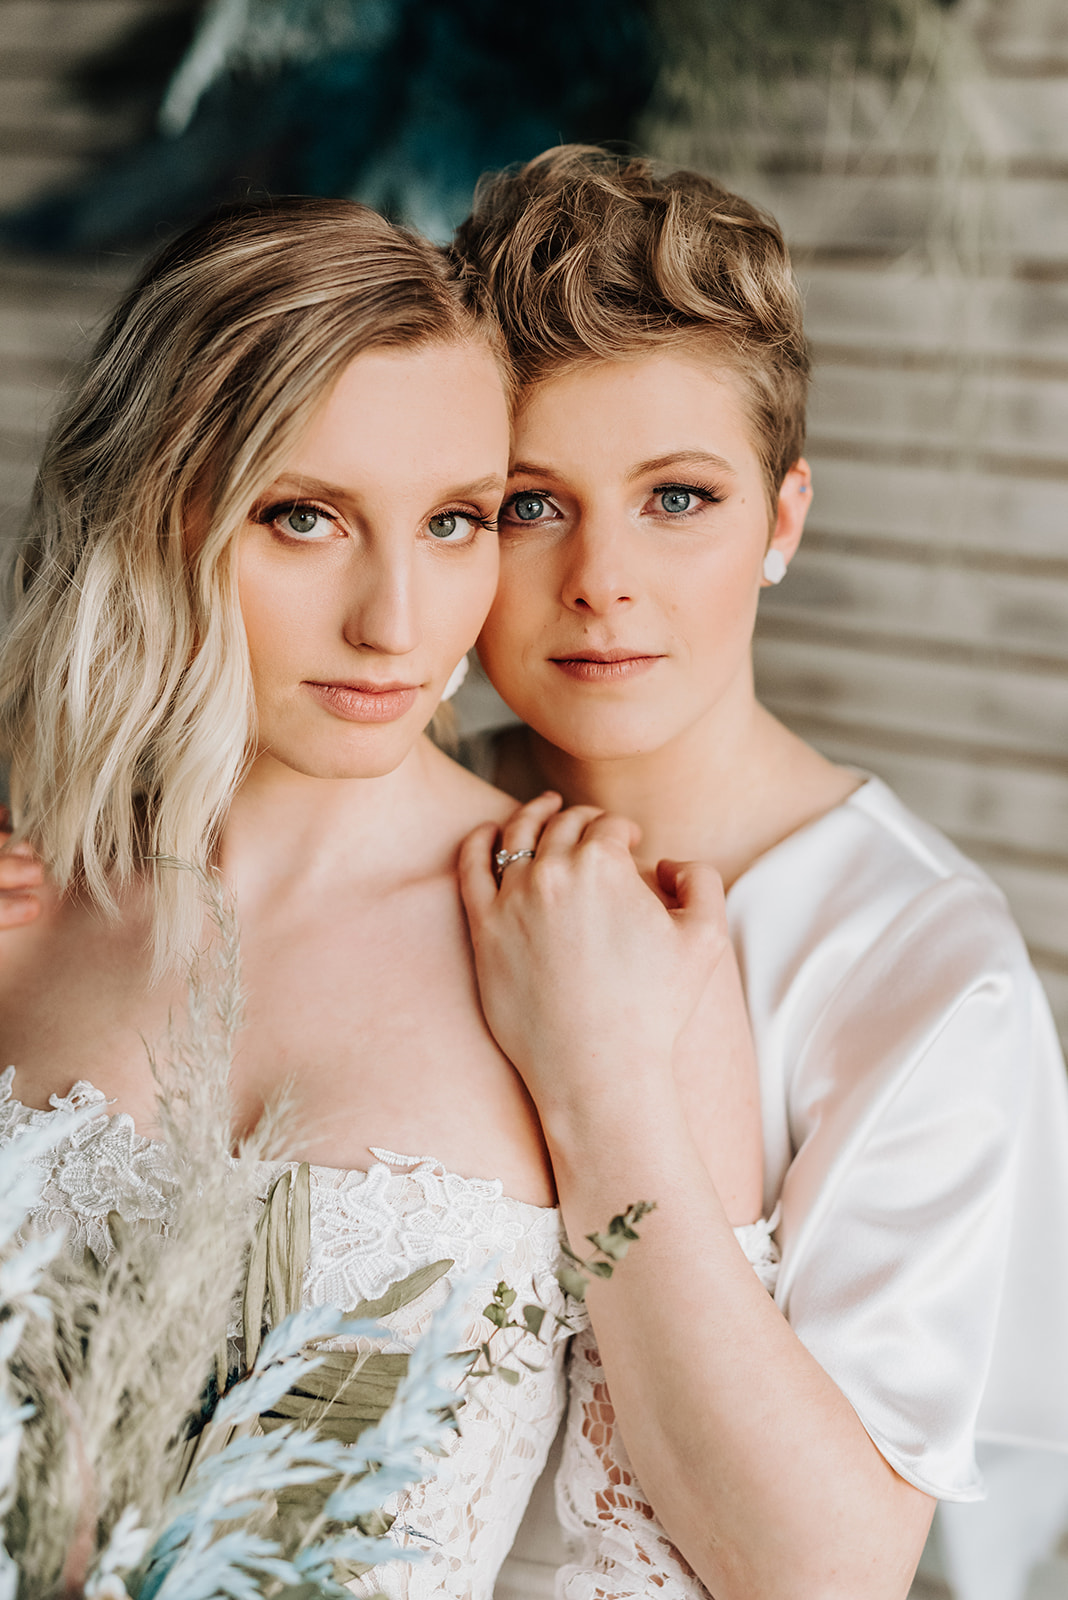 Brides pose together for their bohemian intimate elopement ceremony